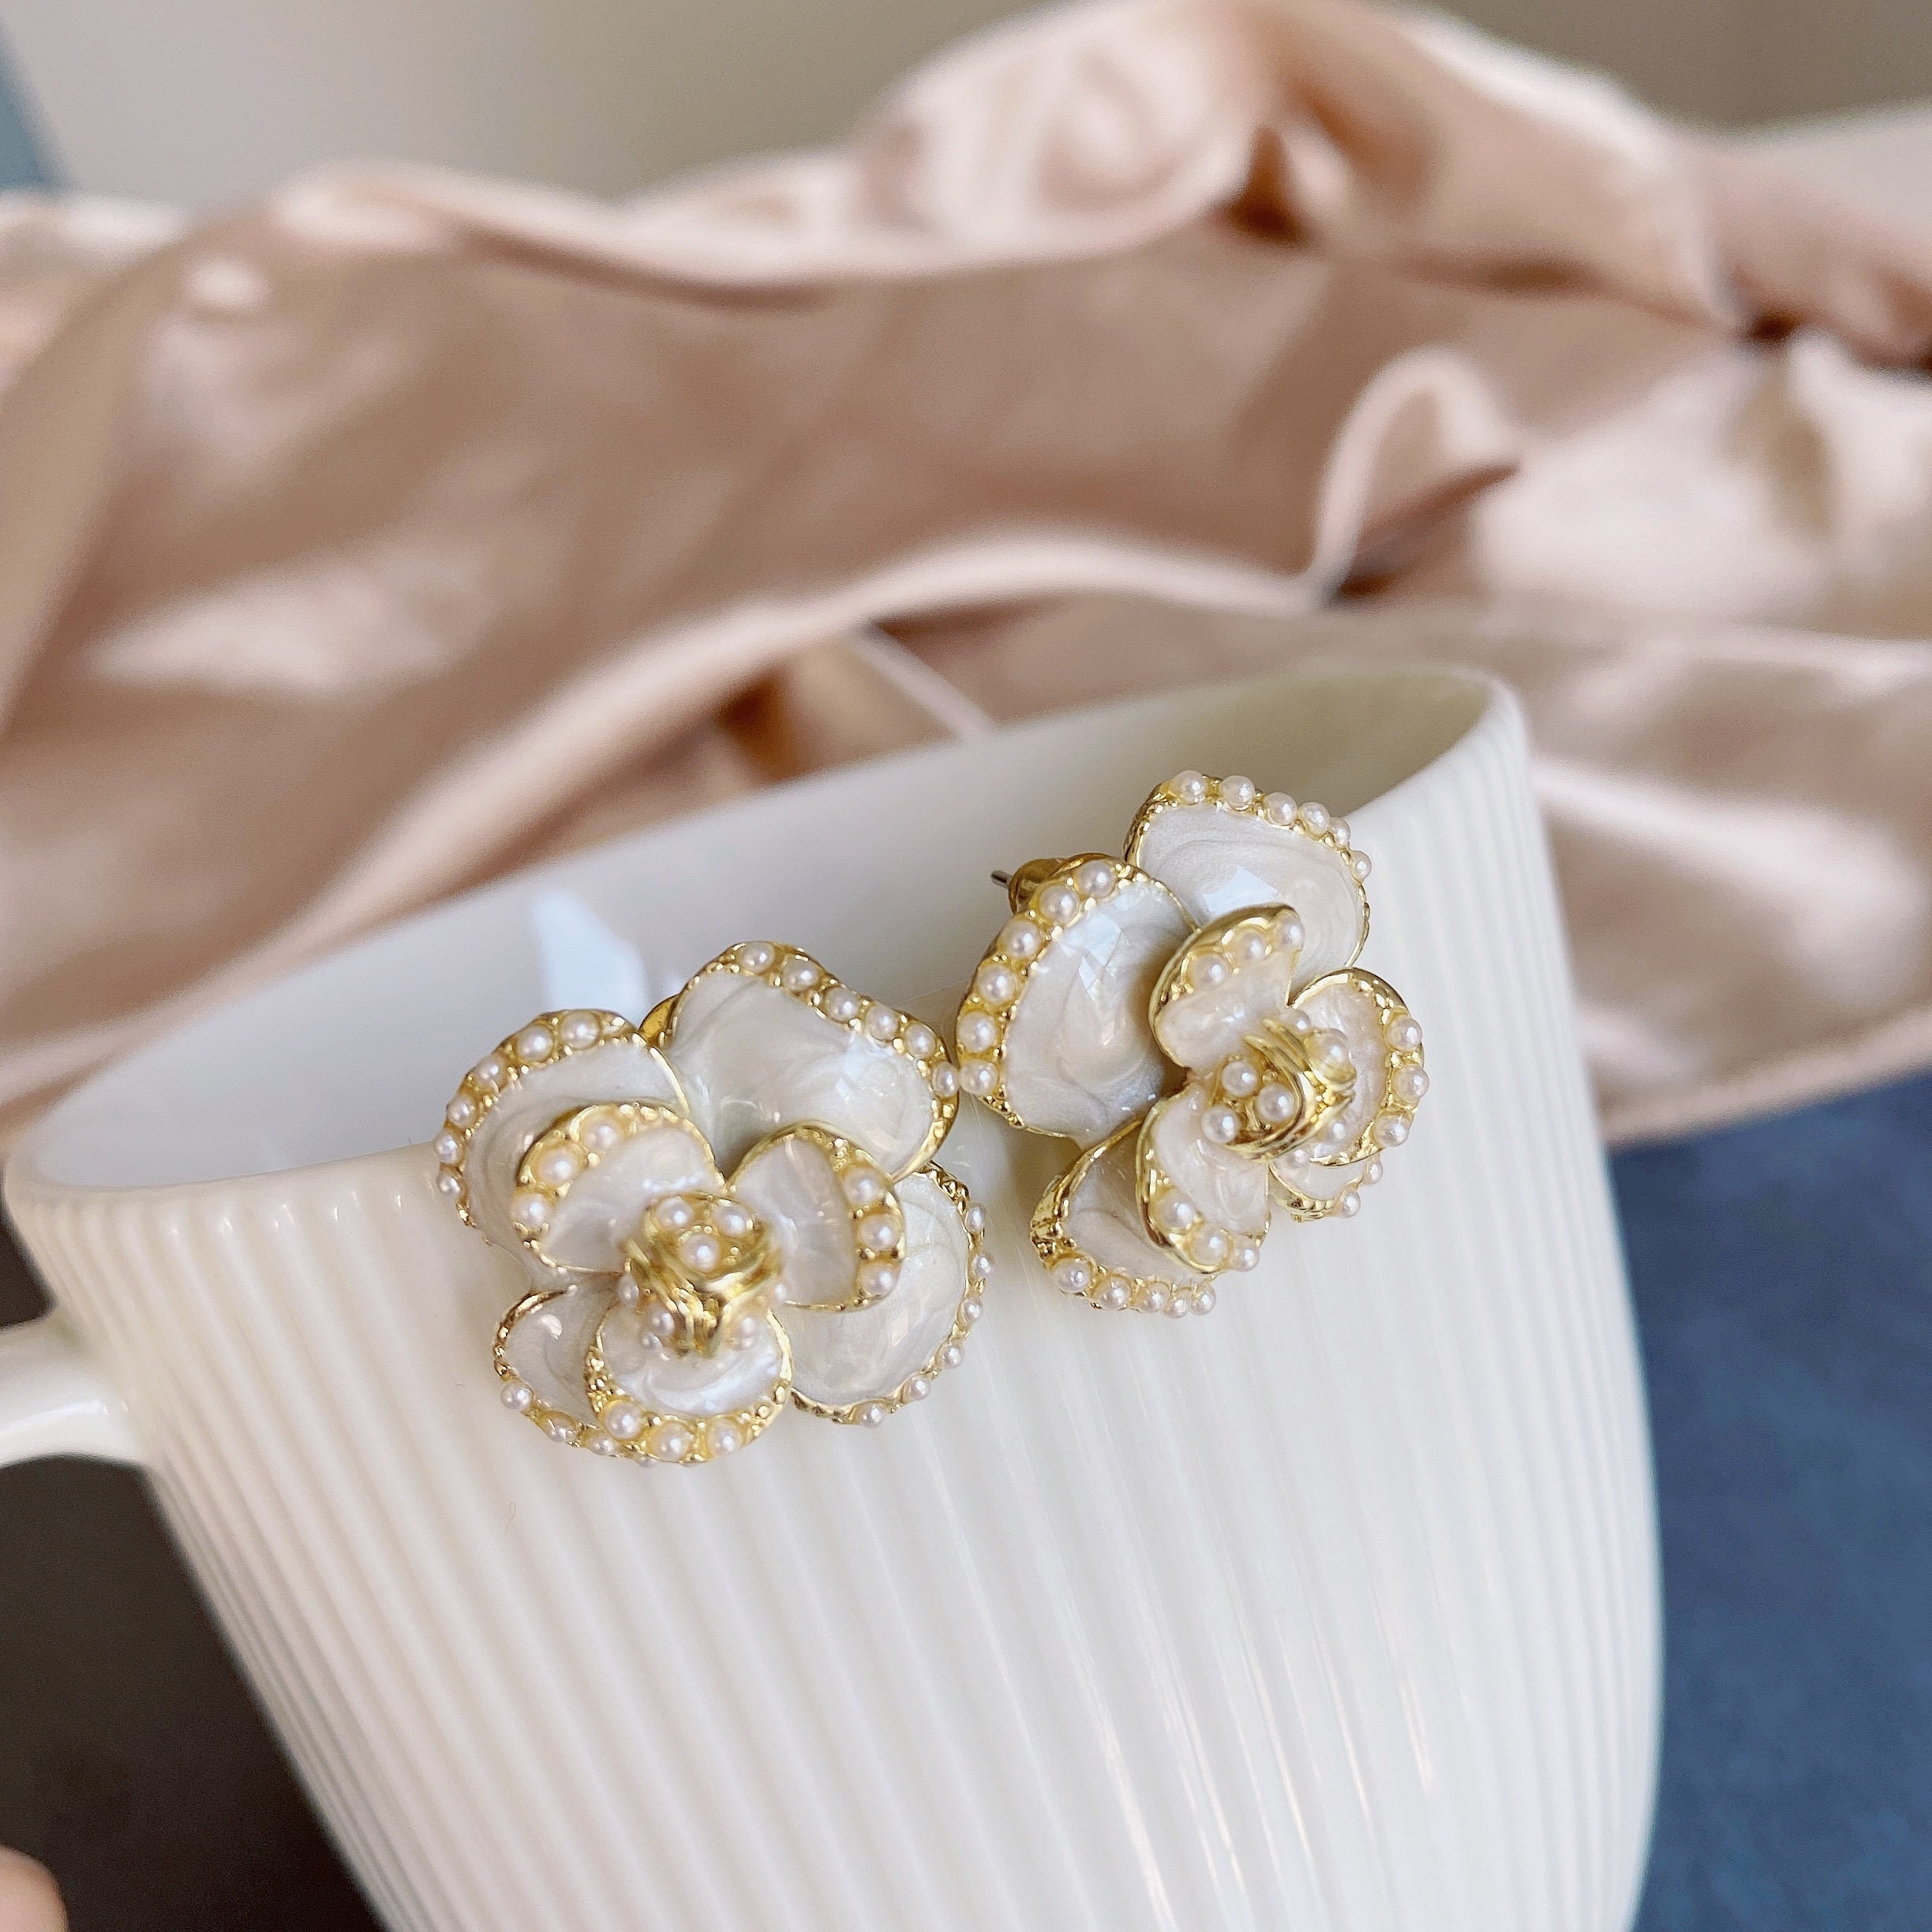 Chanel Style Camellia Flower Rhinestone and Pearl Earrings